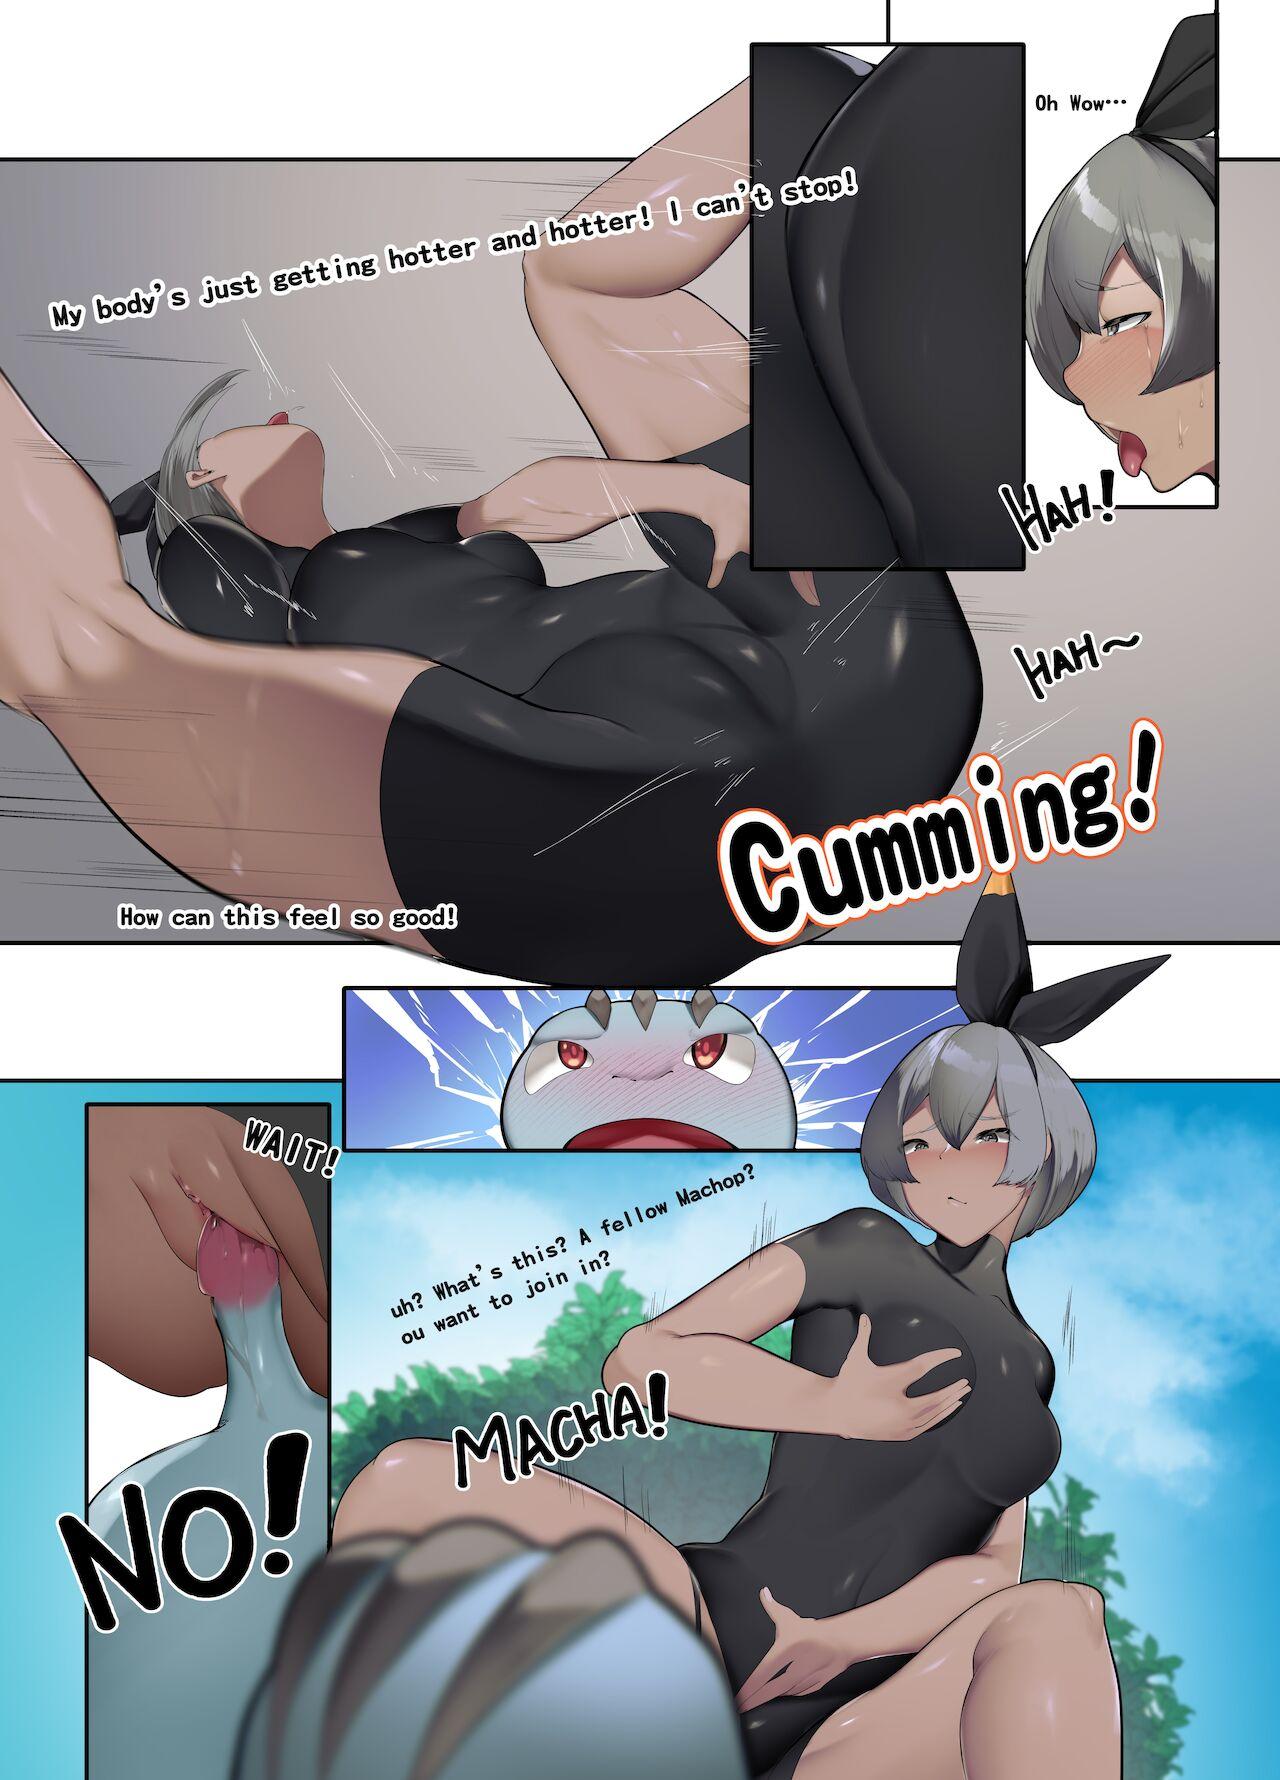 Chaturbate To Become A Master - Pokemon | pocket monsters Lesbian Porn - Page 7